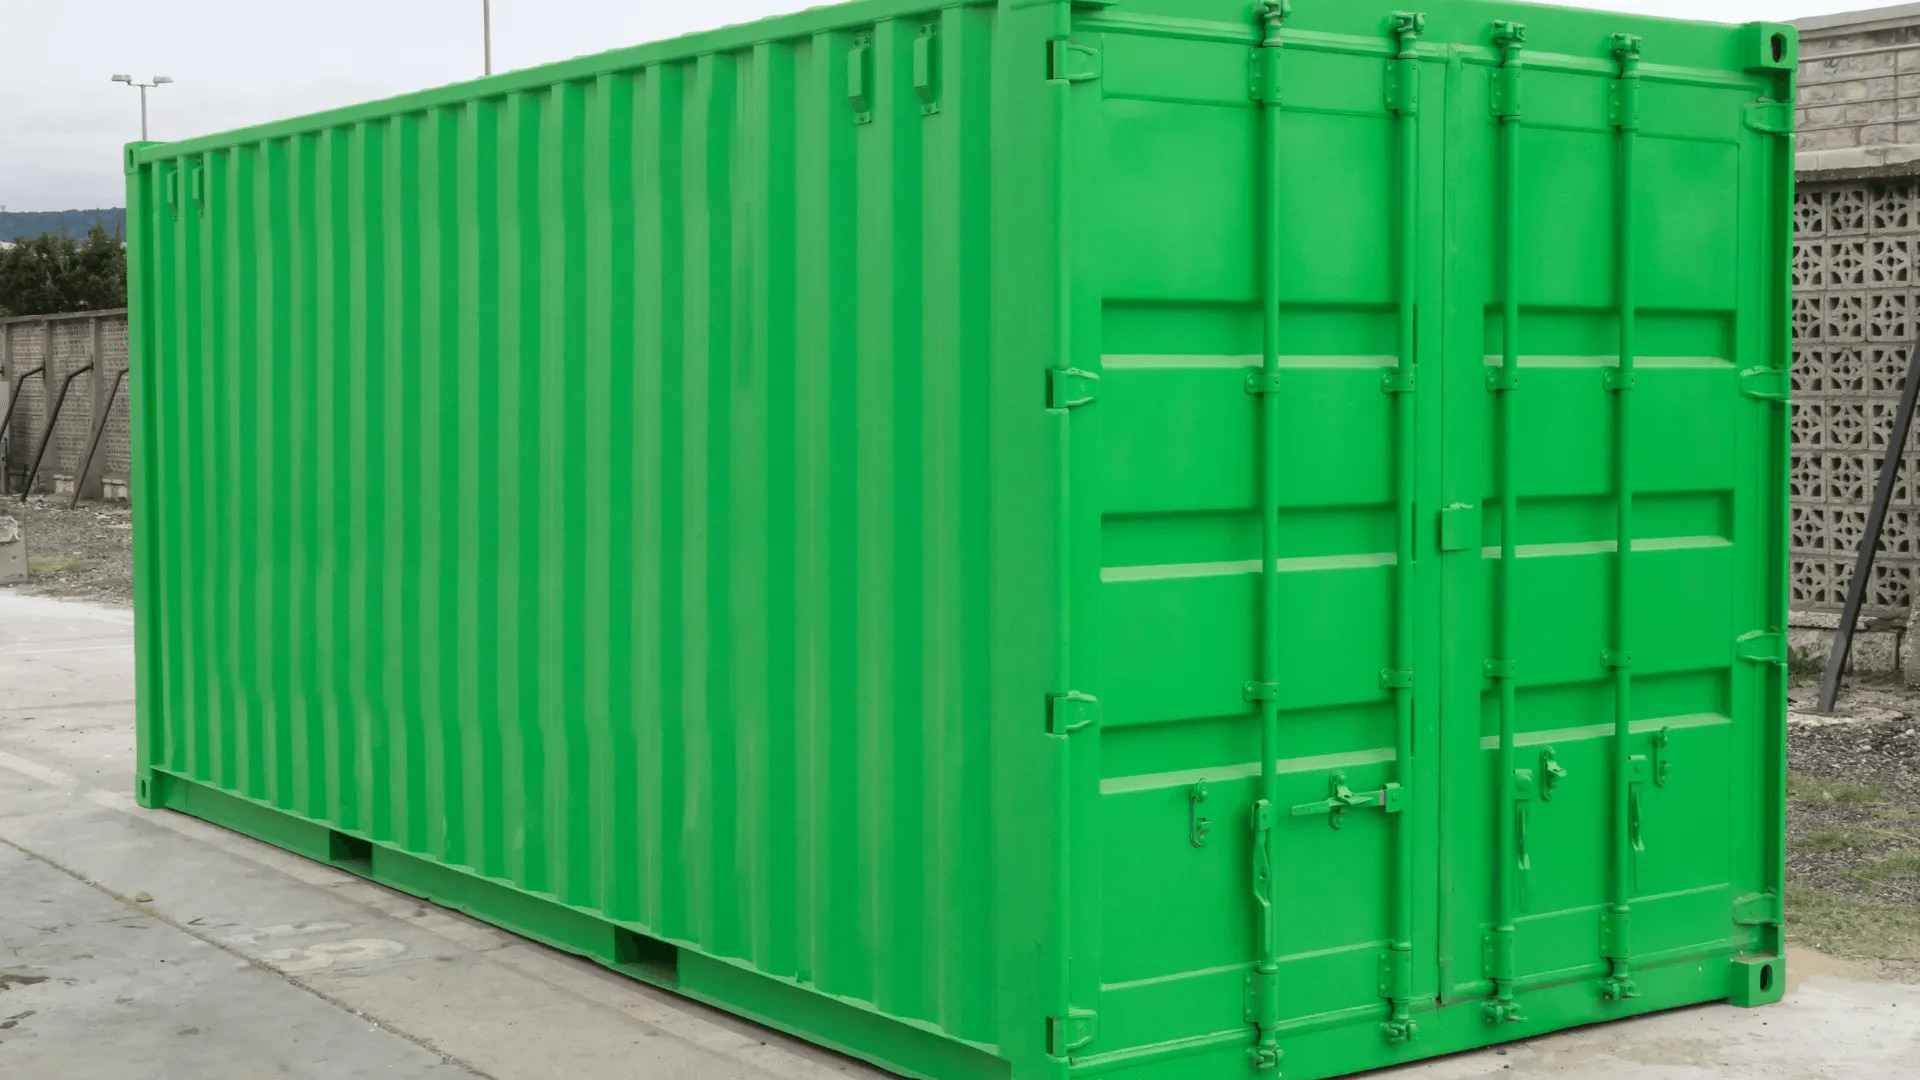 Standard container condition